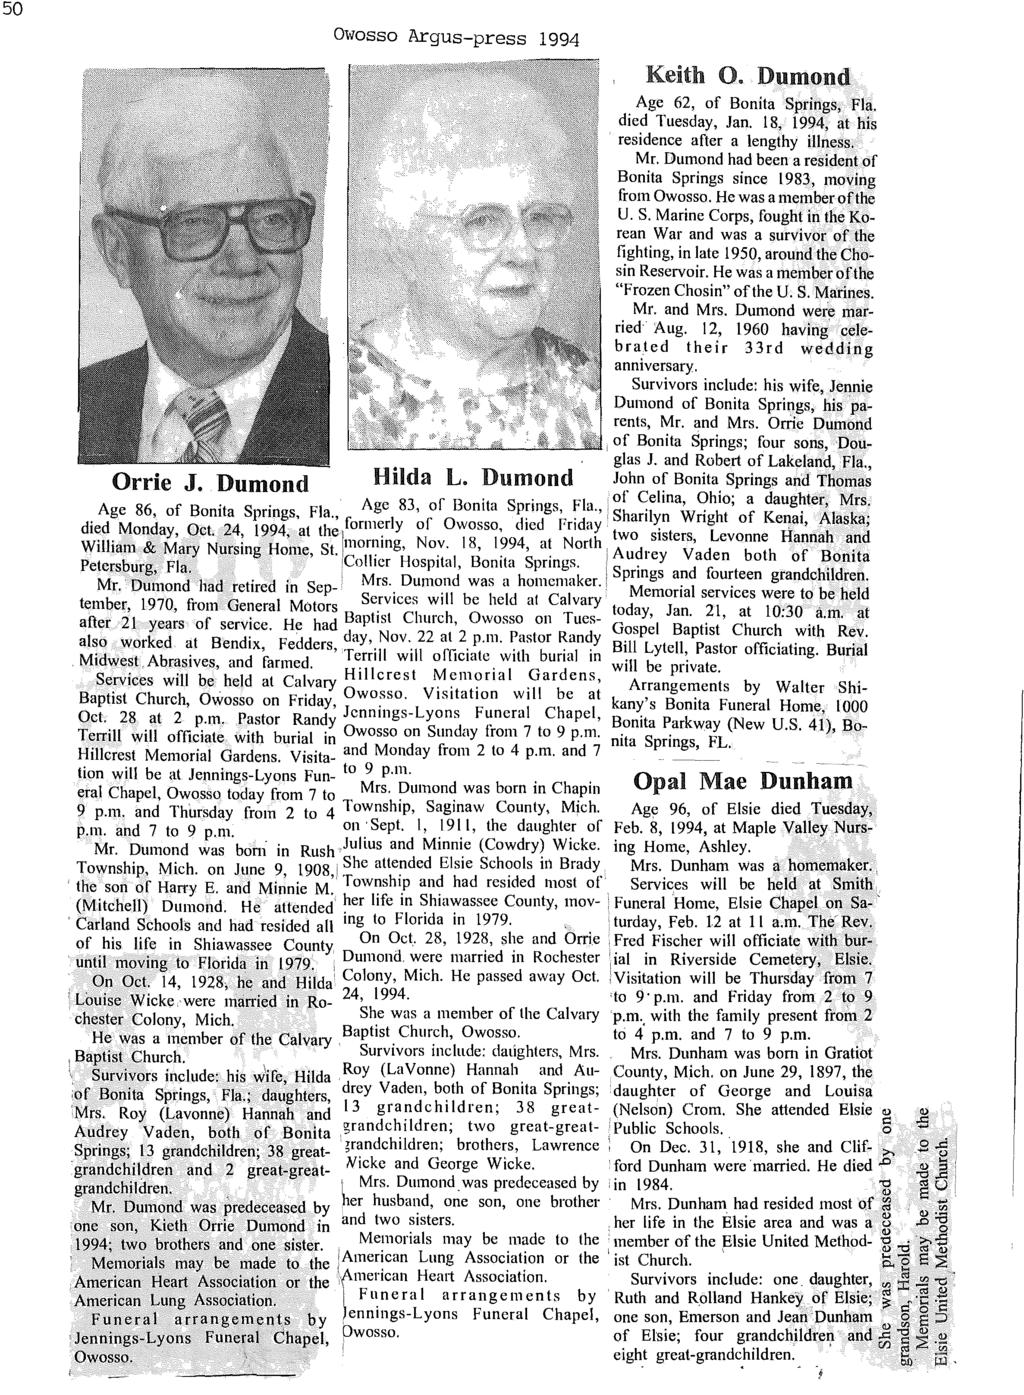 on ('I 50 owosso Argus-press 1994 Keith O. Dumond. Age 62, of Bonita Springs, Fla. died Tuesday, Jan. 18, 1994 at his residence after a lengthy iii~ess. Mr.